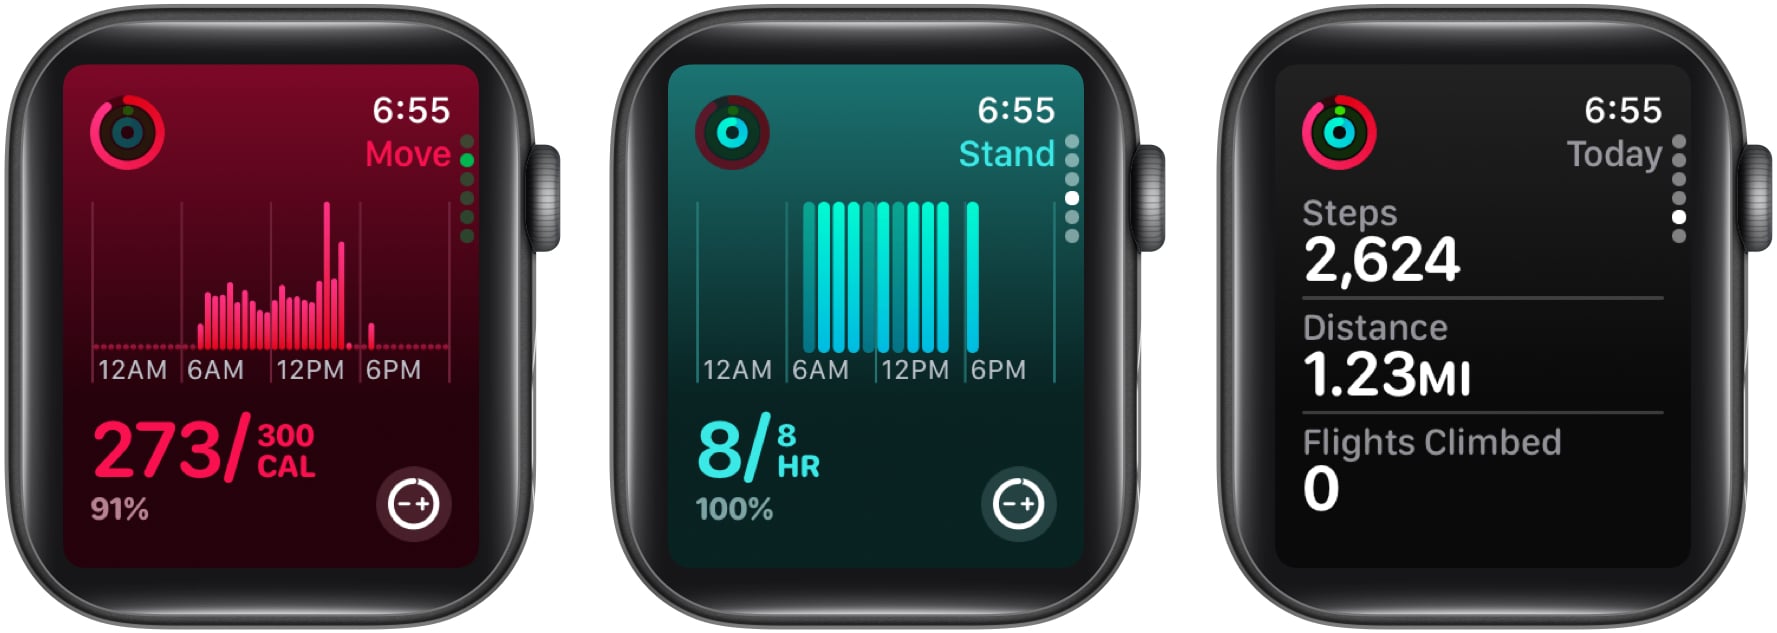 see Move, Exercise, and Stand data, along with the number of steps taken, distance walked, and flights of stairs climbed